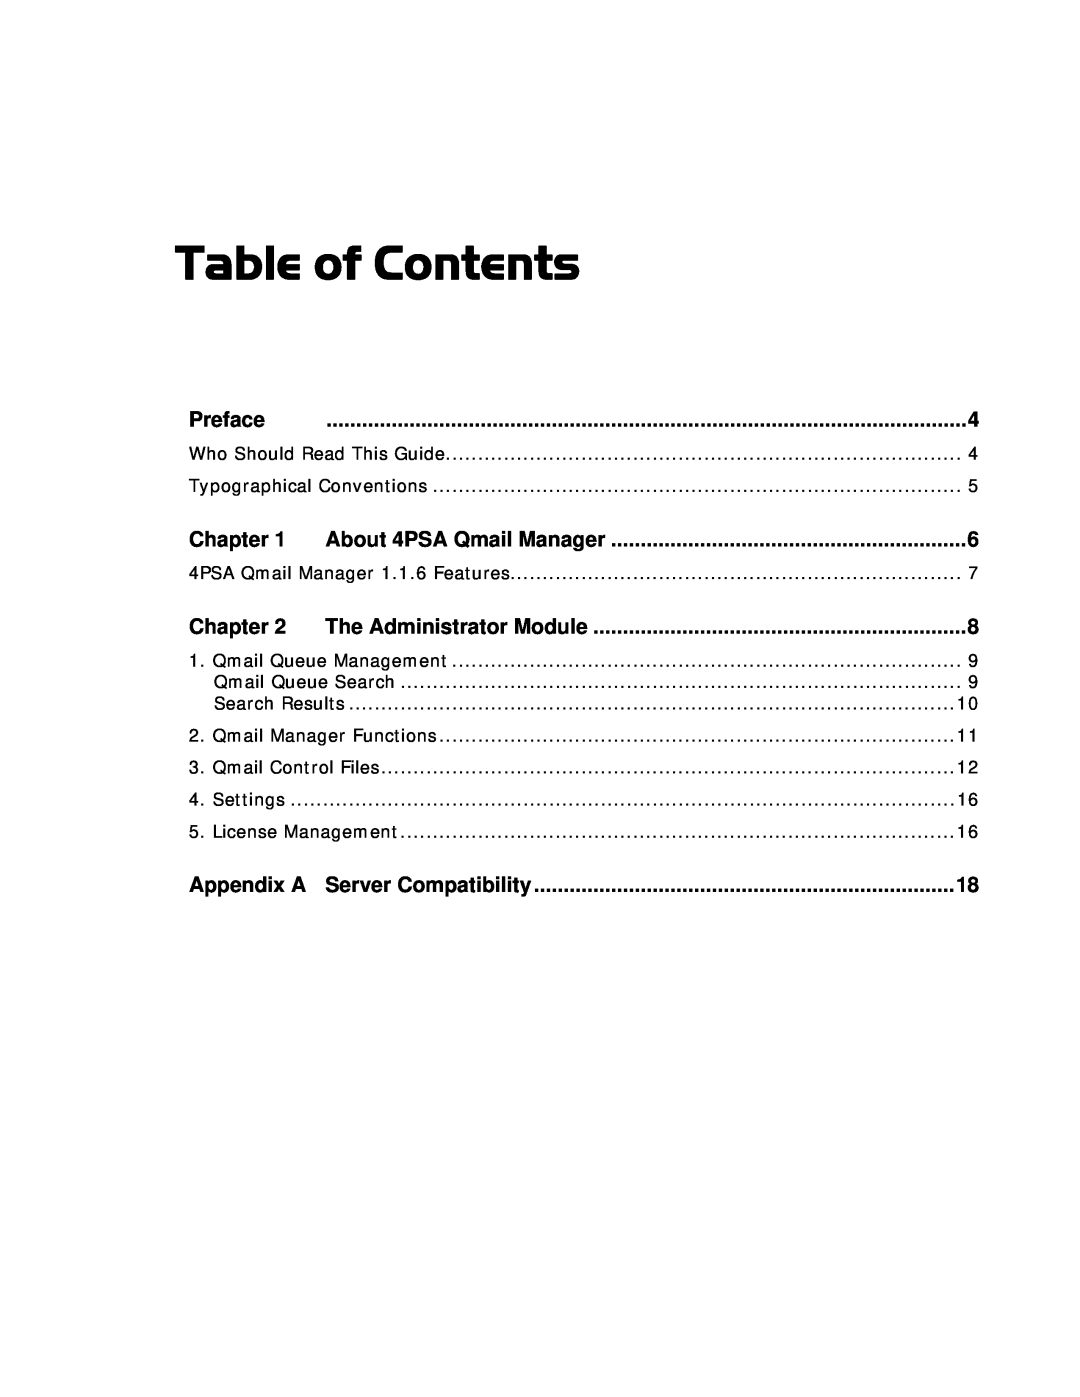 321 Studios Plesk 7.x Reloaded, Plesk 8 manual Table of Contents 